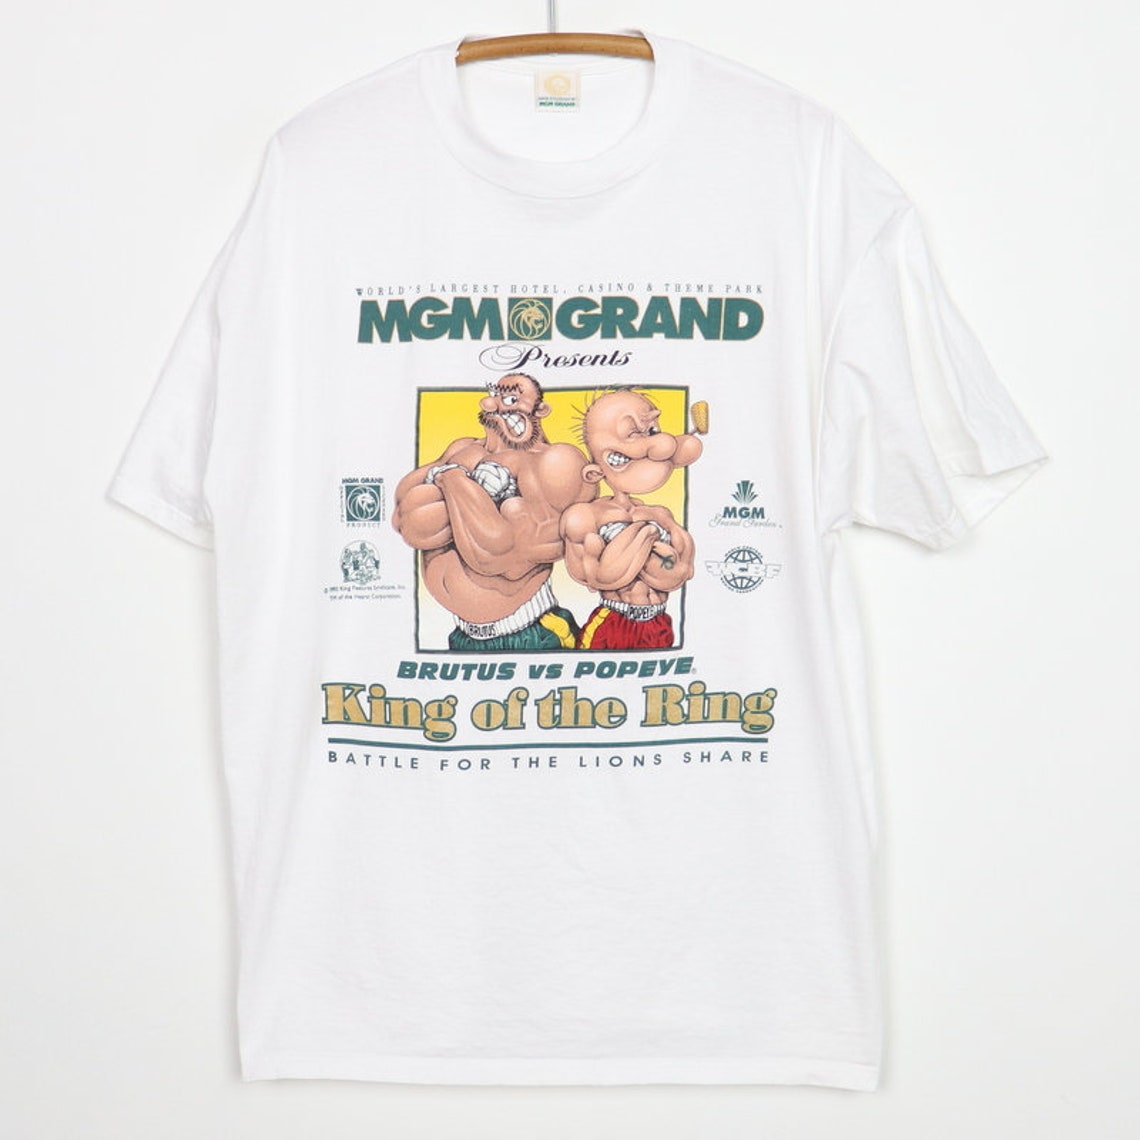 Vintage 1993 Brutus vs Popeye King Of The Ring MGM Grand